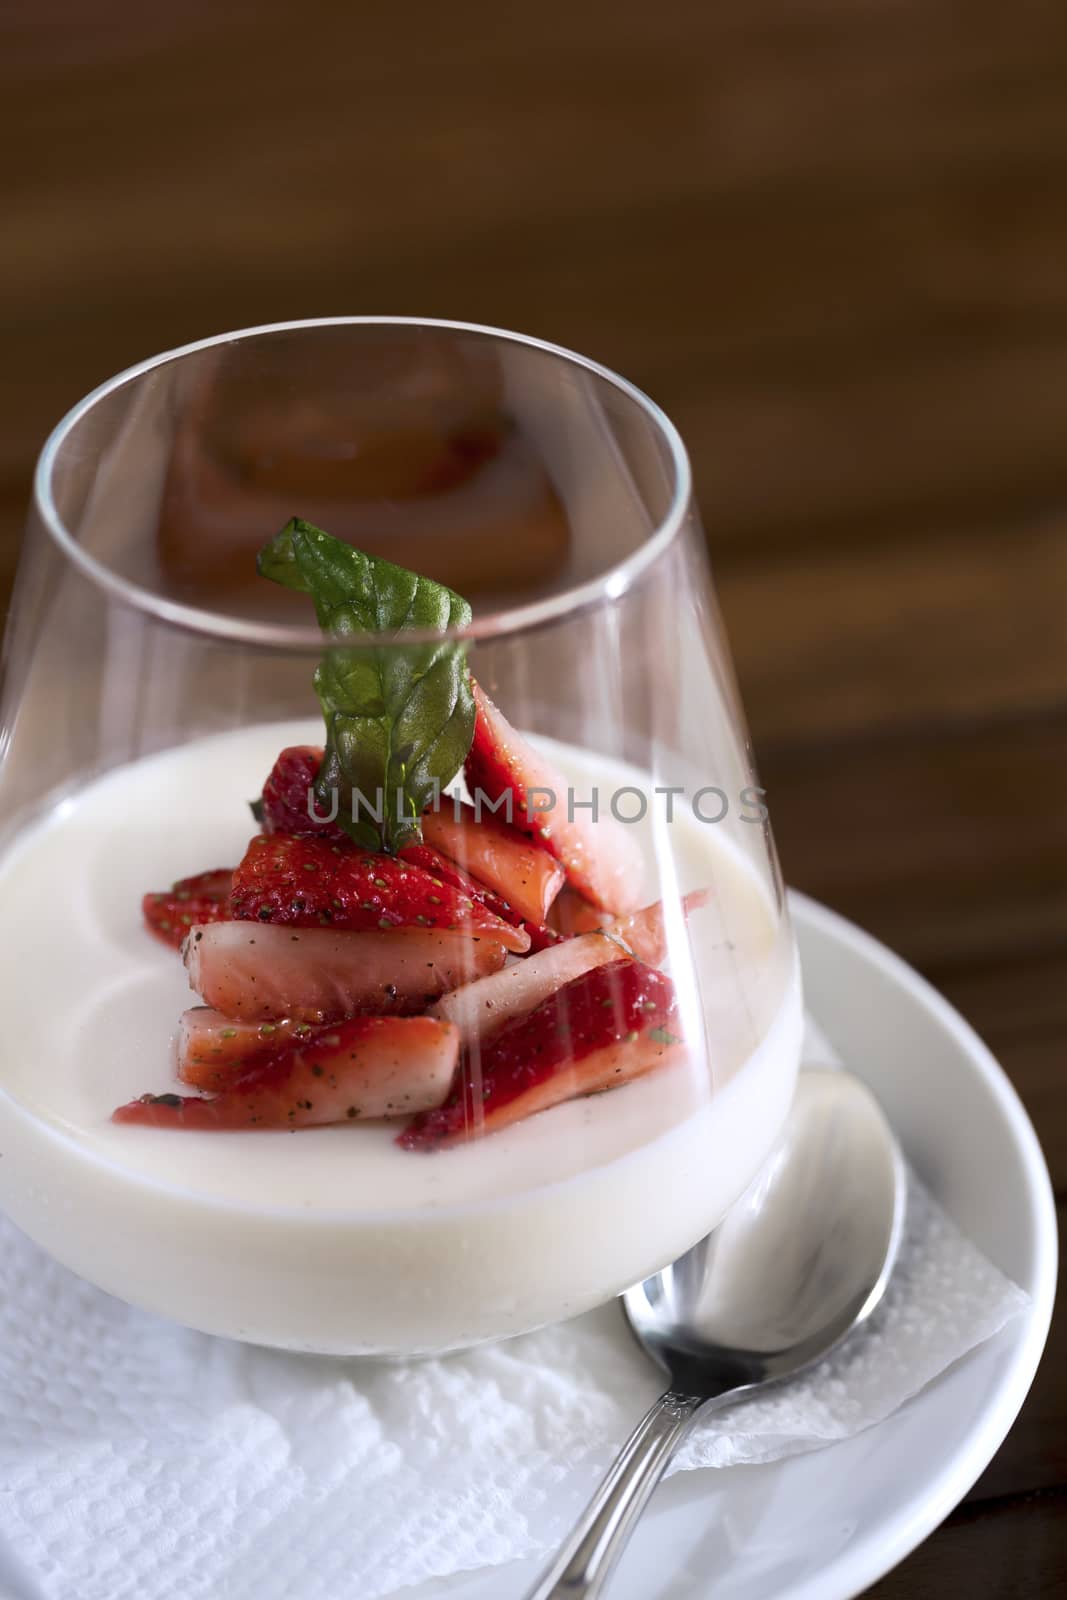 A vertical shot of a strawberry dessert in a glass ready to be served.